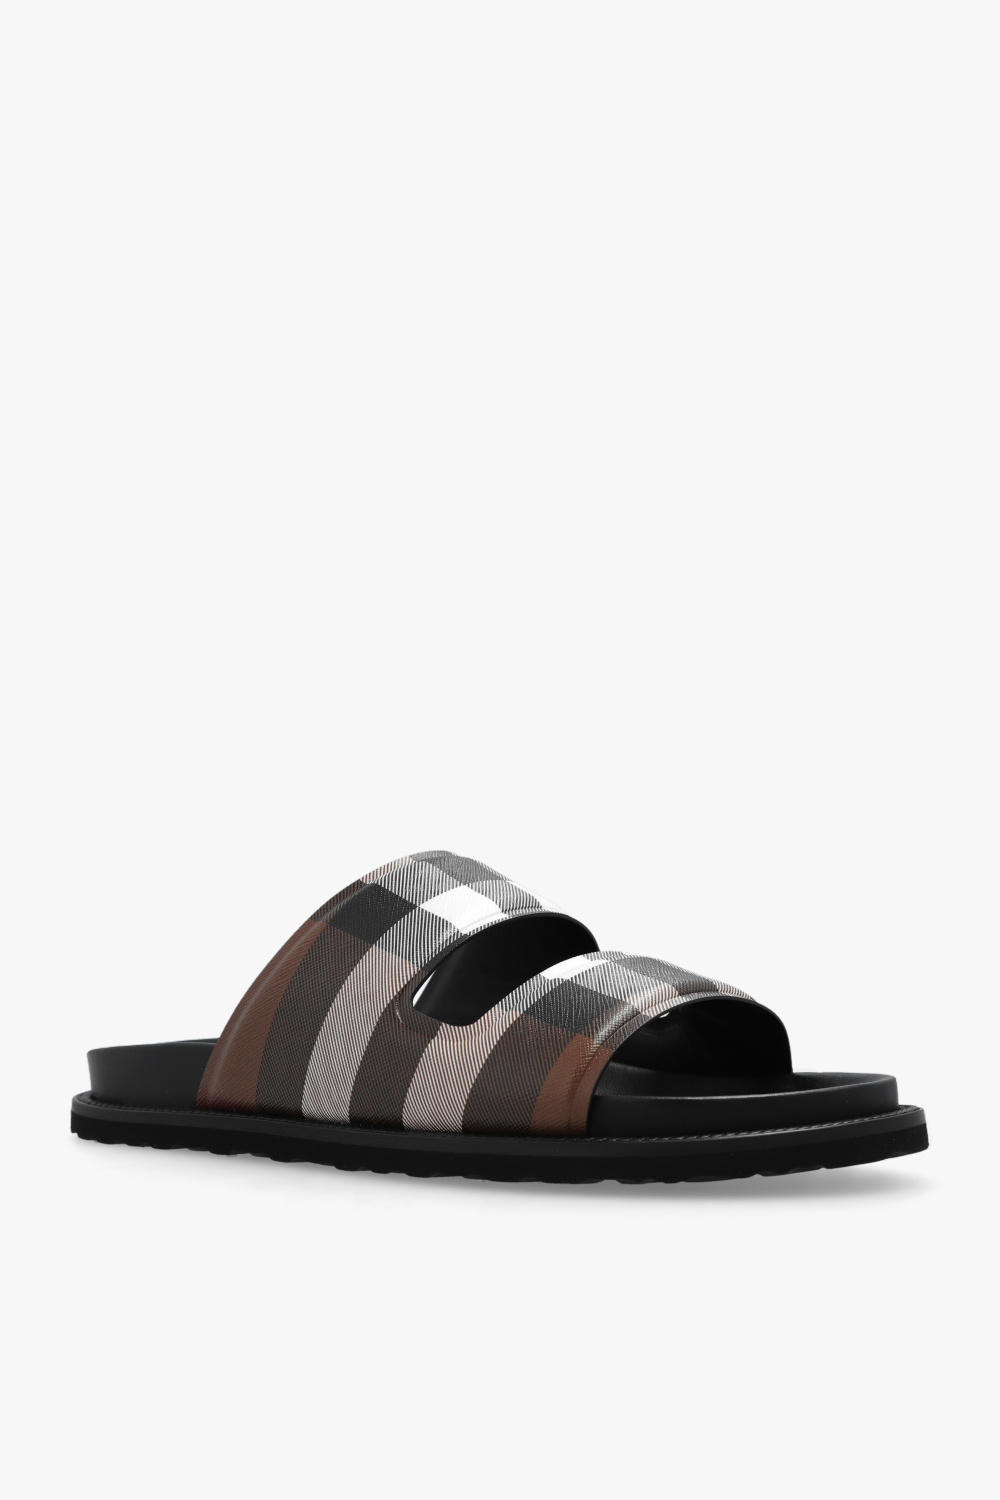 Burberry Checked slides